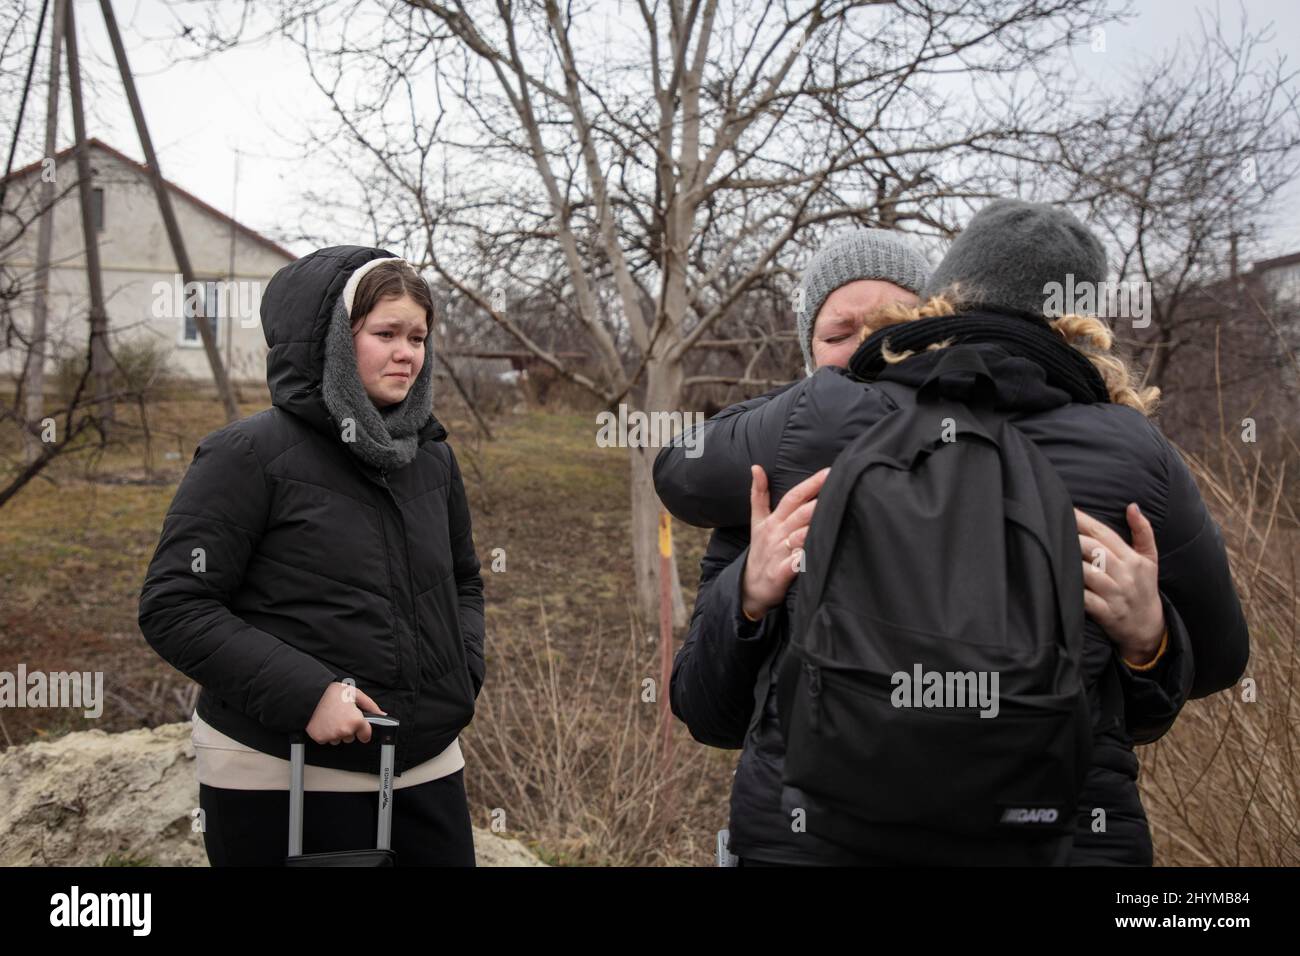 Ukrainian refugees at the border, Olena and Nastia Reminska, 23 and 14 years old, they arrived at the border with their mother Svetlana, who only Stock Photo